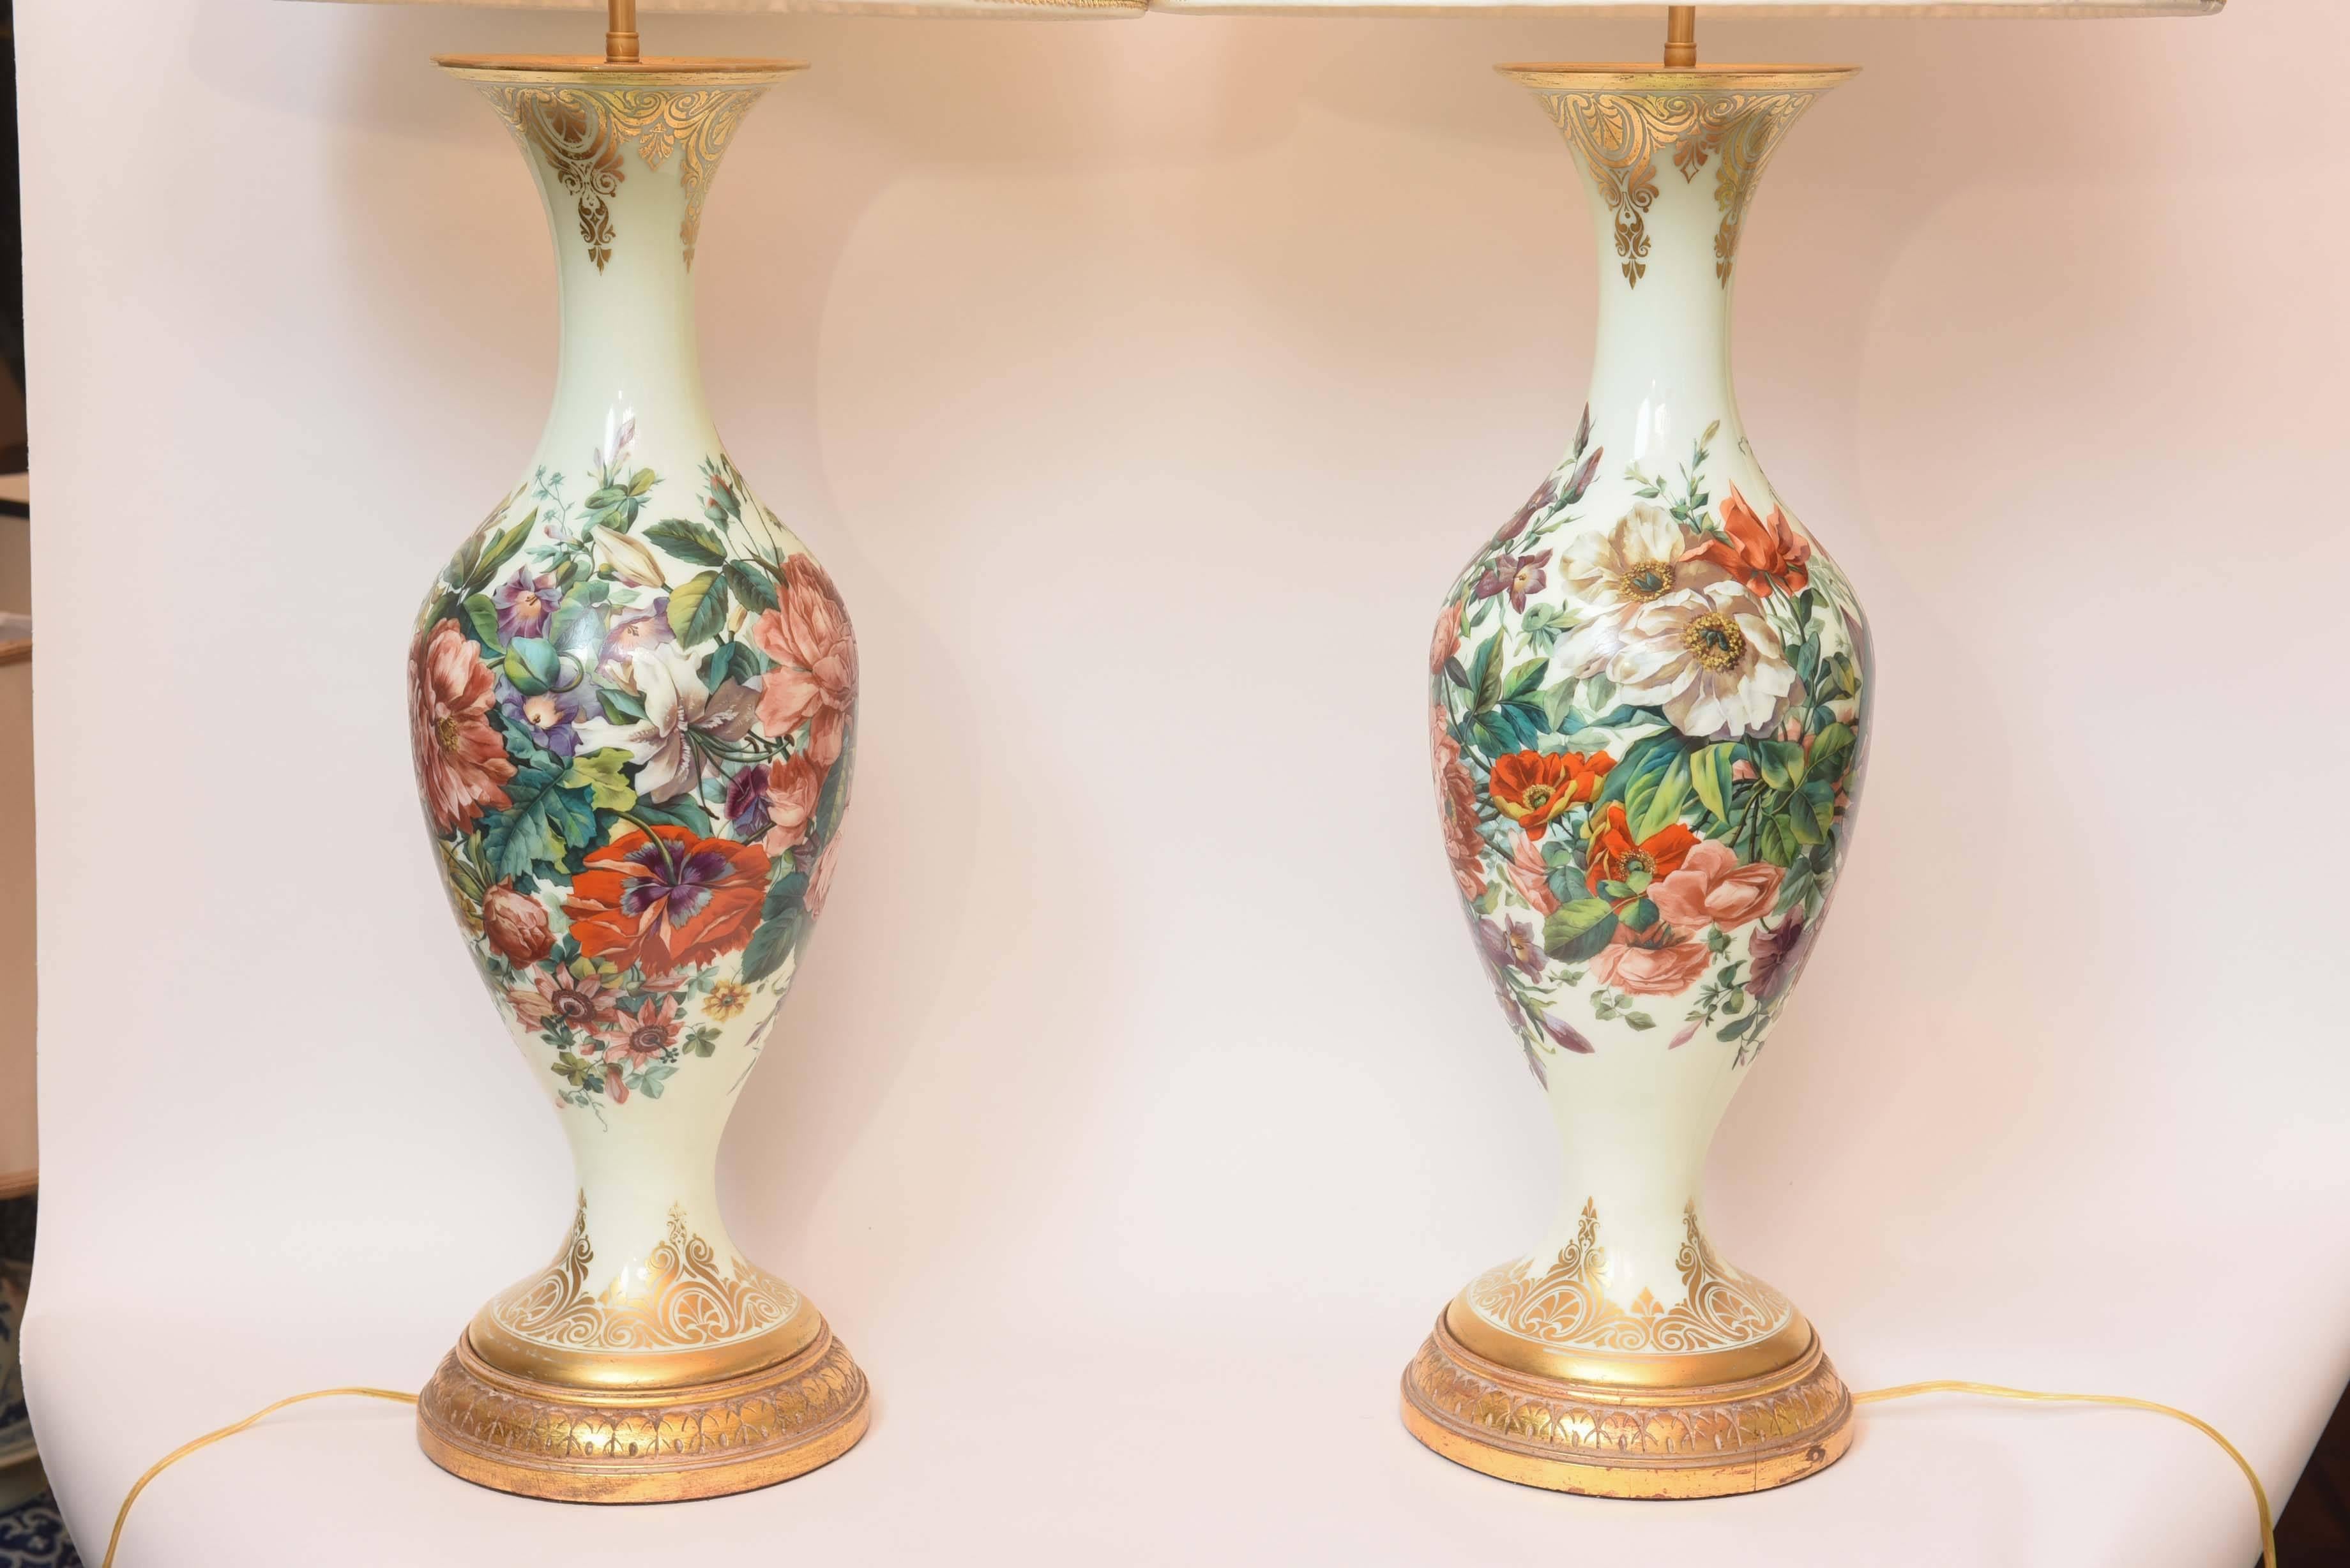 Massive Pair of 19th Century French Opaline Glass Lamps For Sale 4